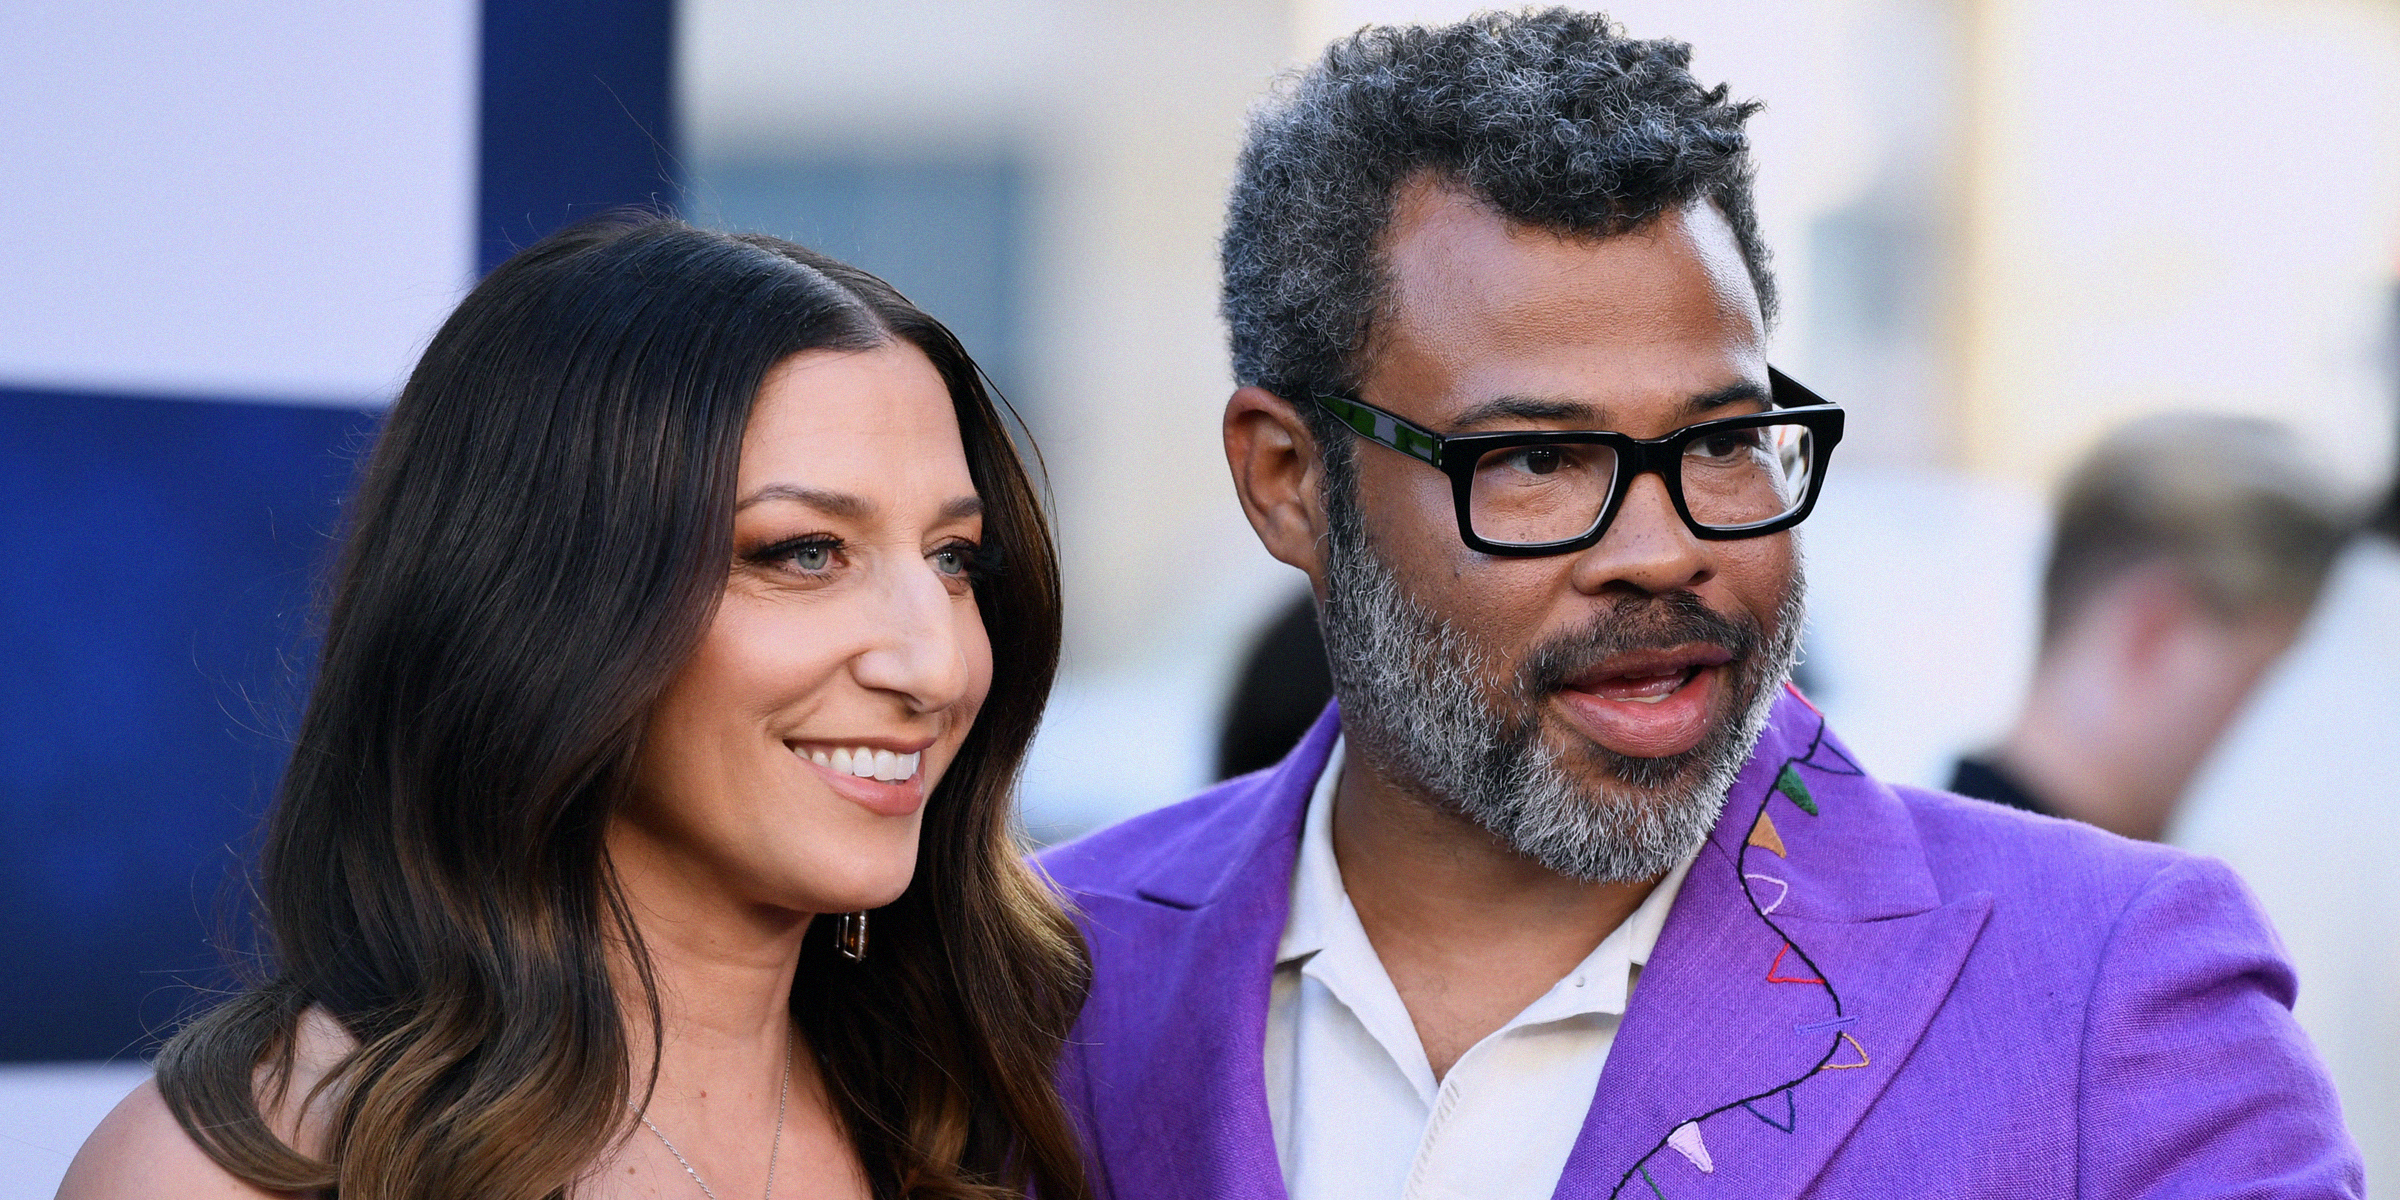 Chelsea Peretti and Jordan Peele | Source: Getty Images